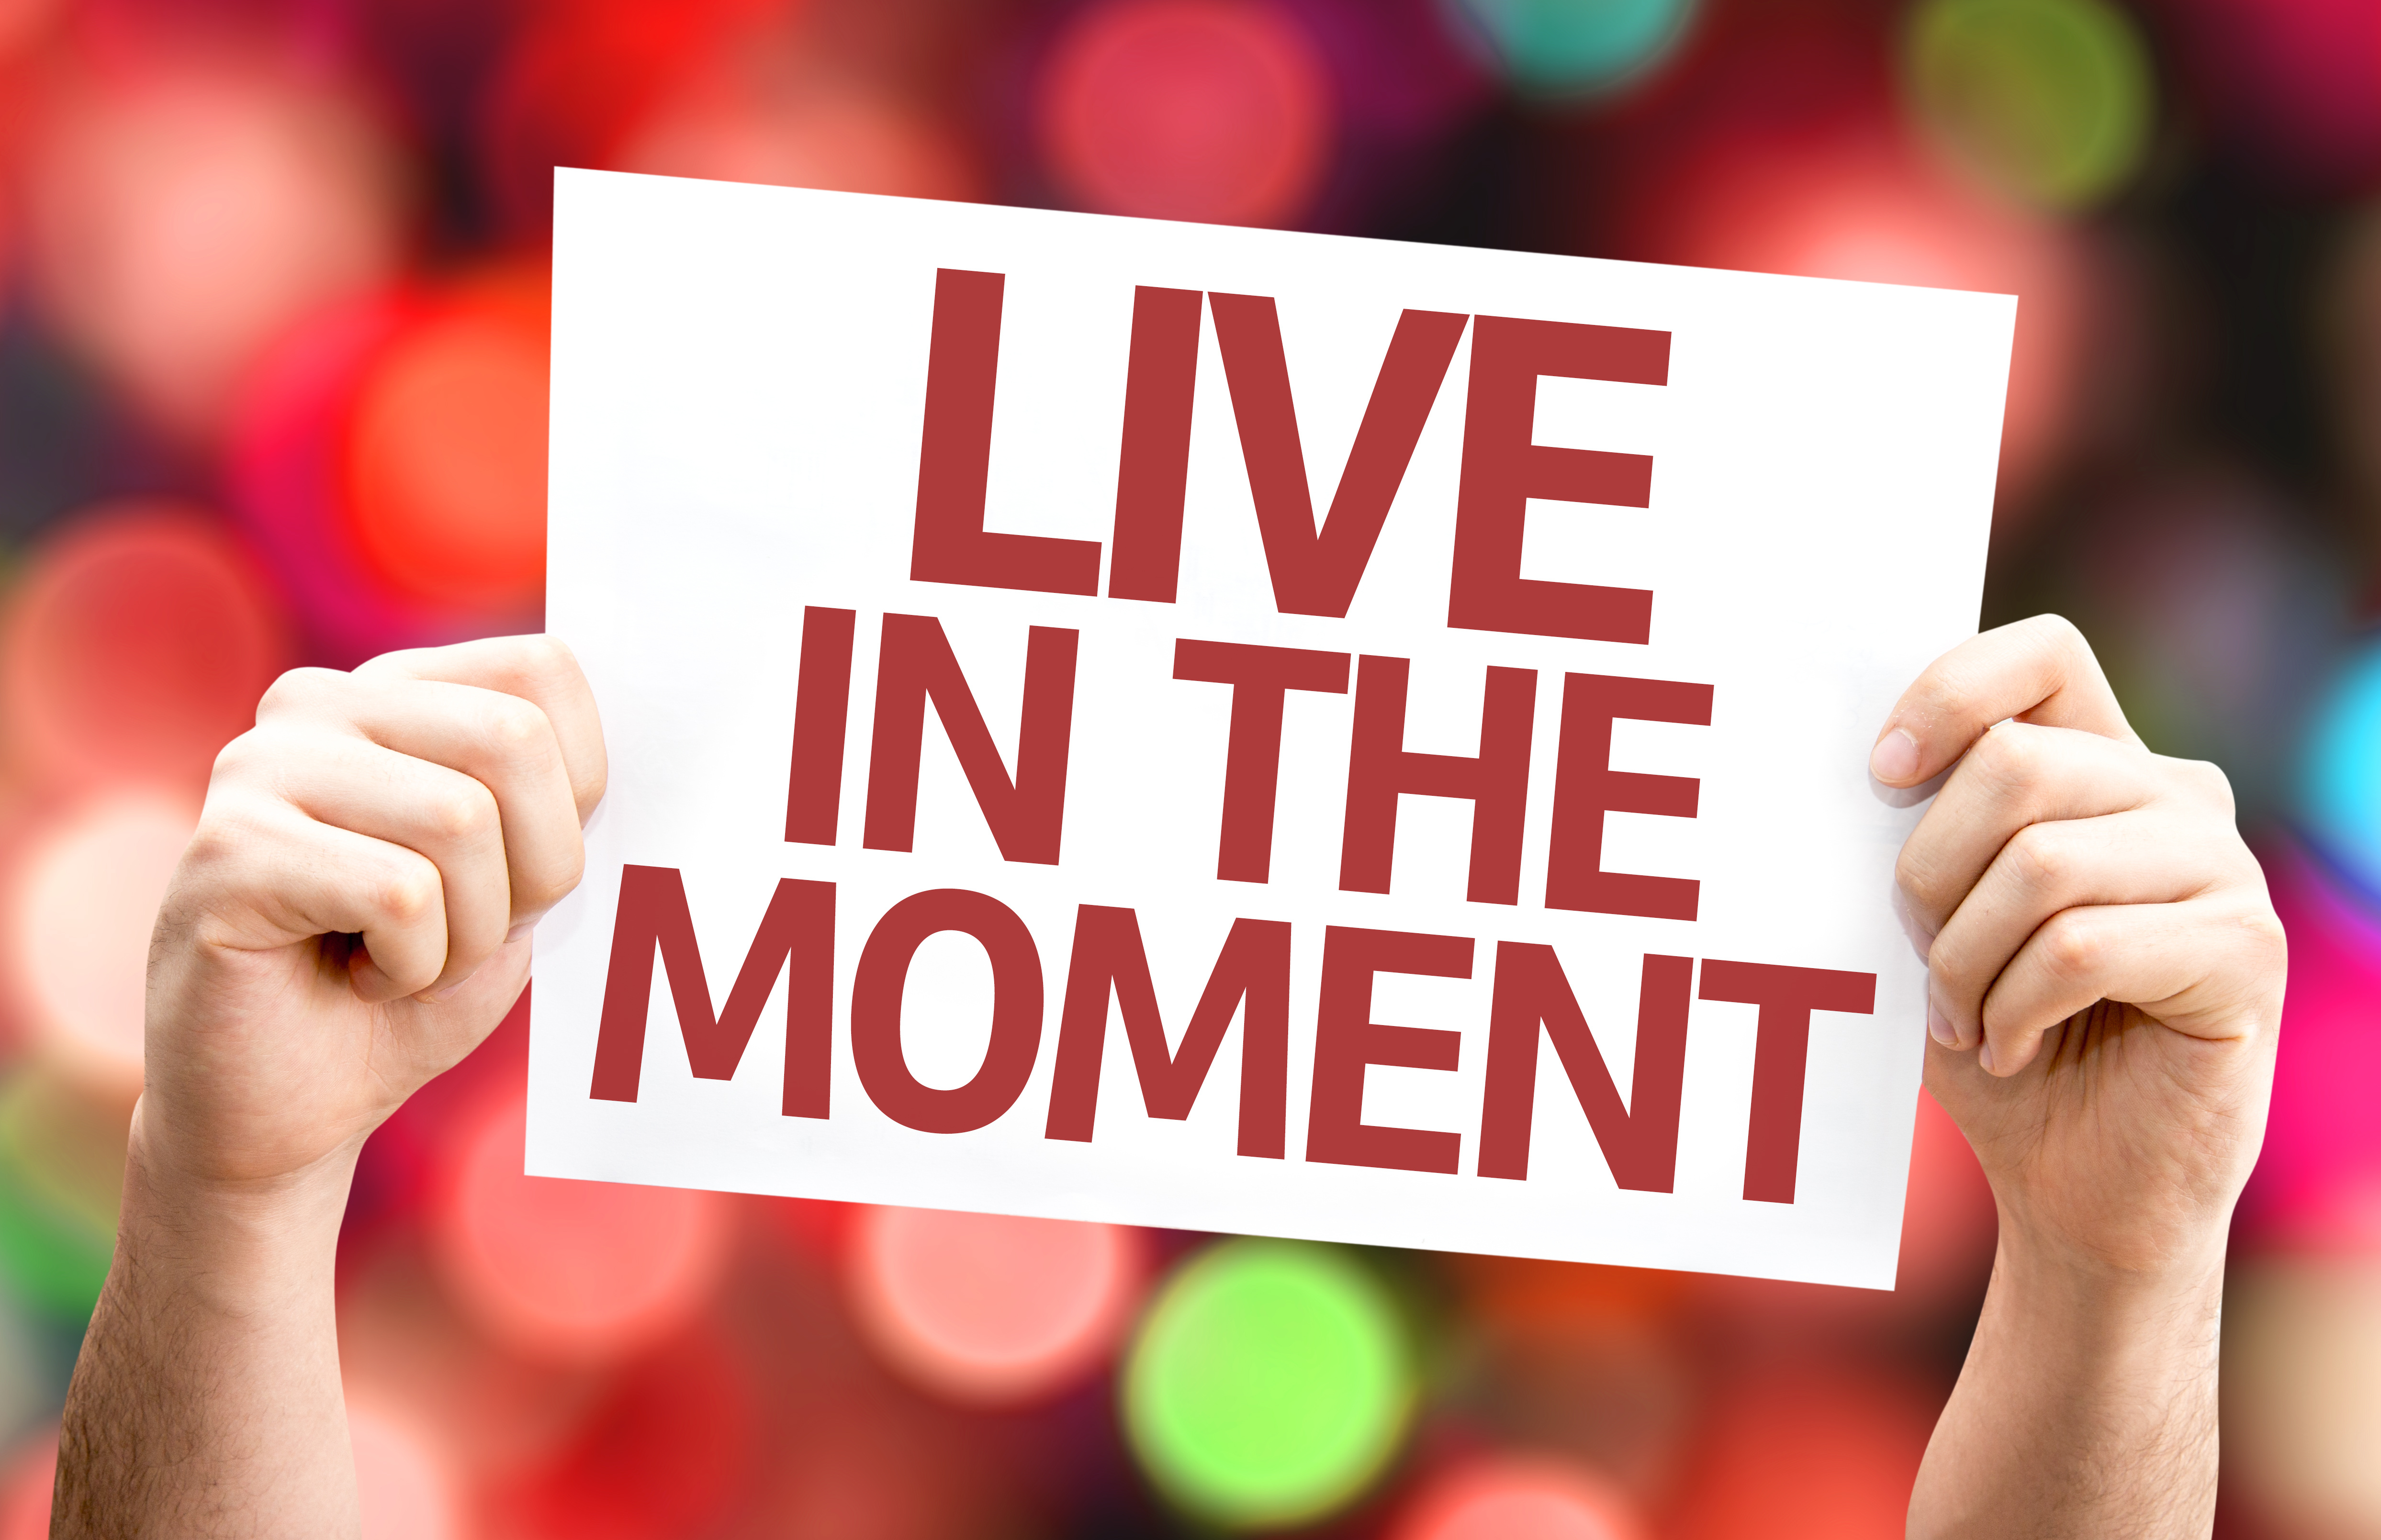 How Can Your Marketing Be More In The Moment? - SponsoredLinX Academy